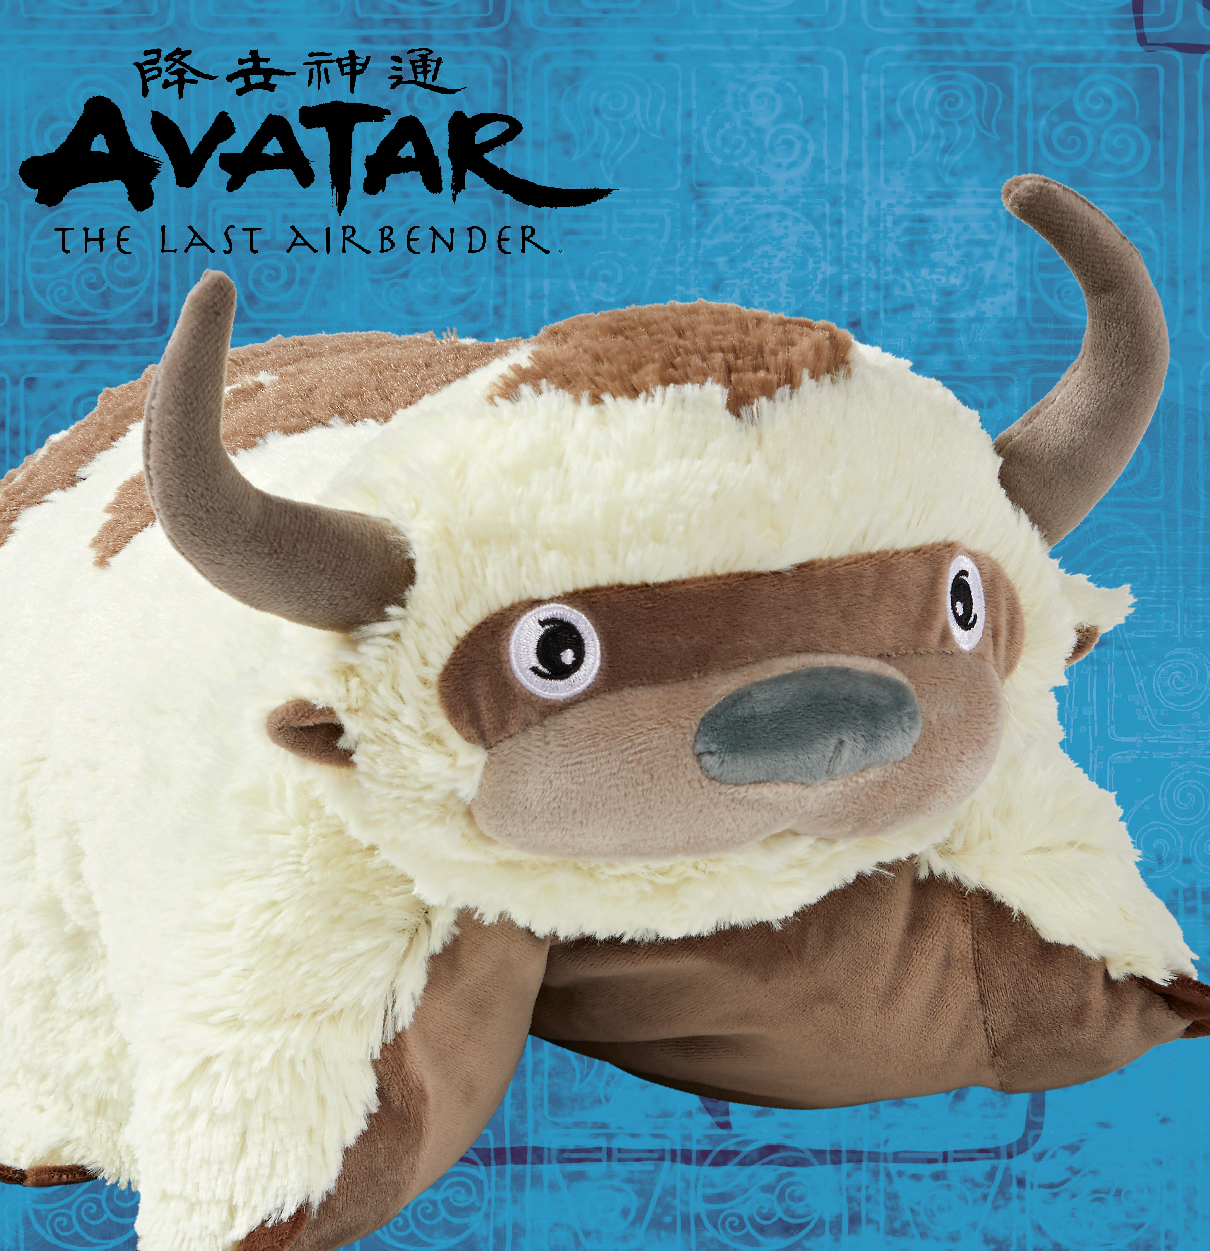 Avatar: The Last Airbender Pillow Pets Category, showing the white and brown Appa the flying bison Pillow Pet.